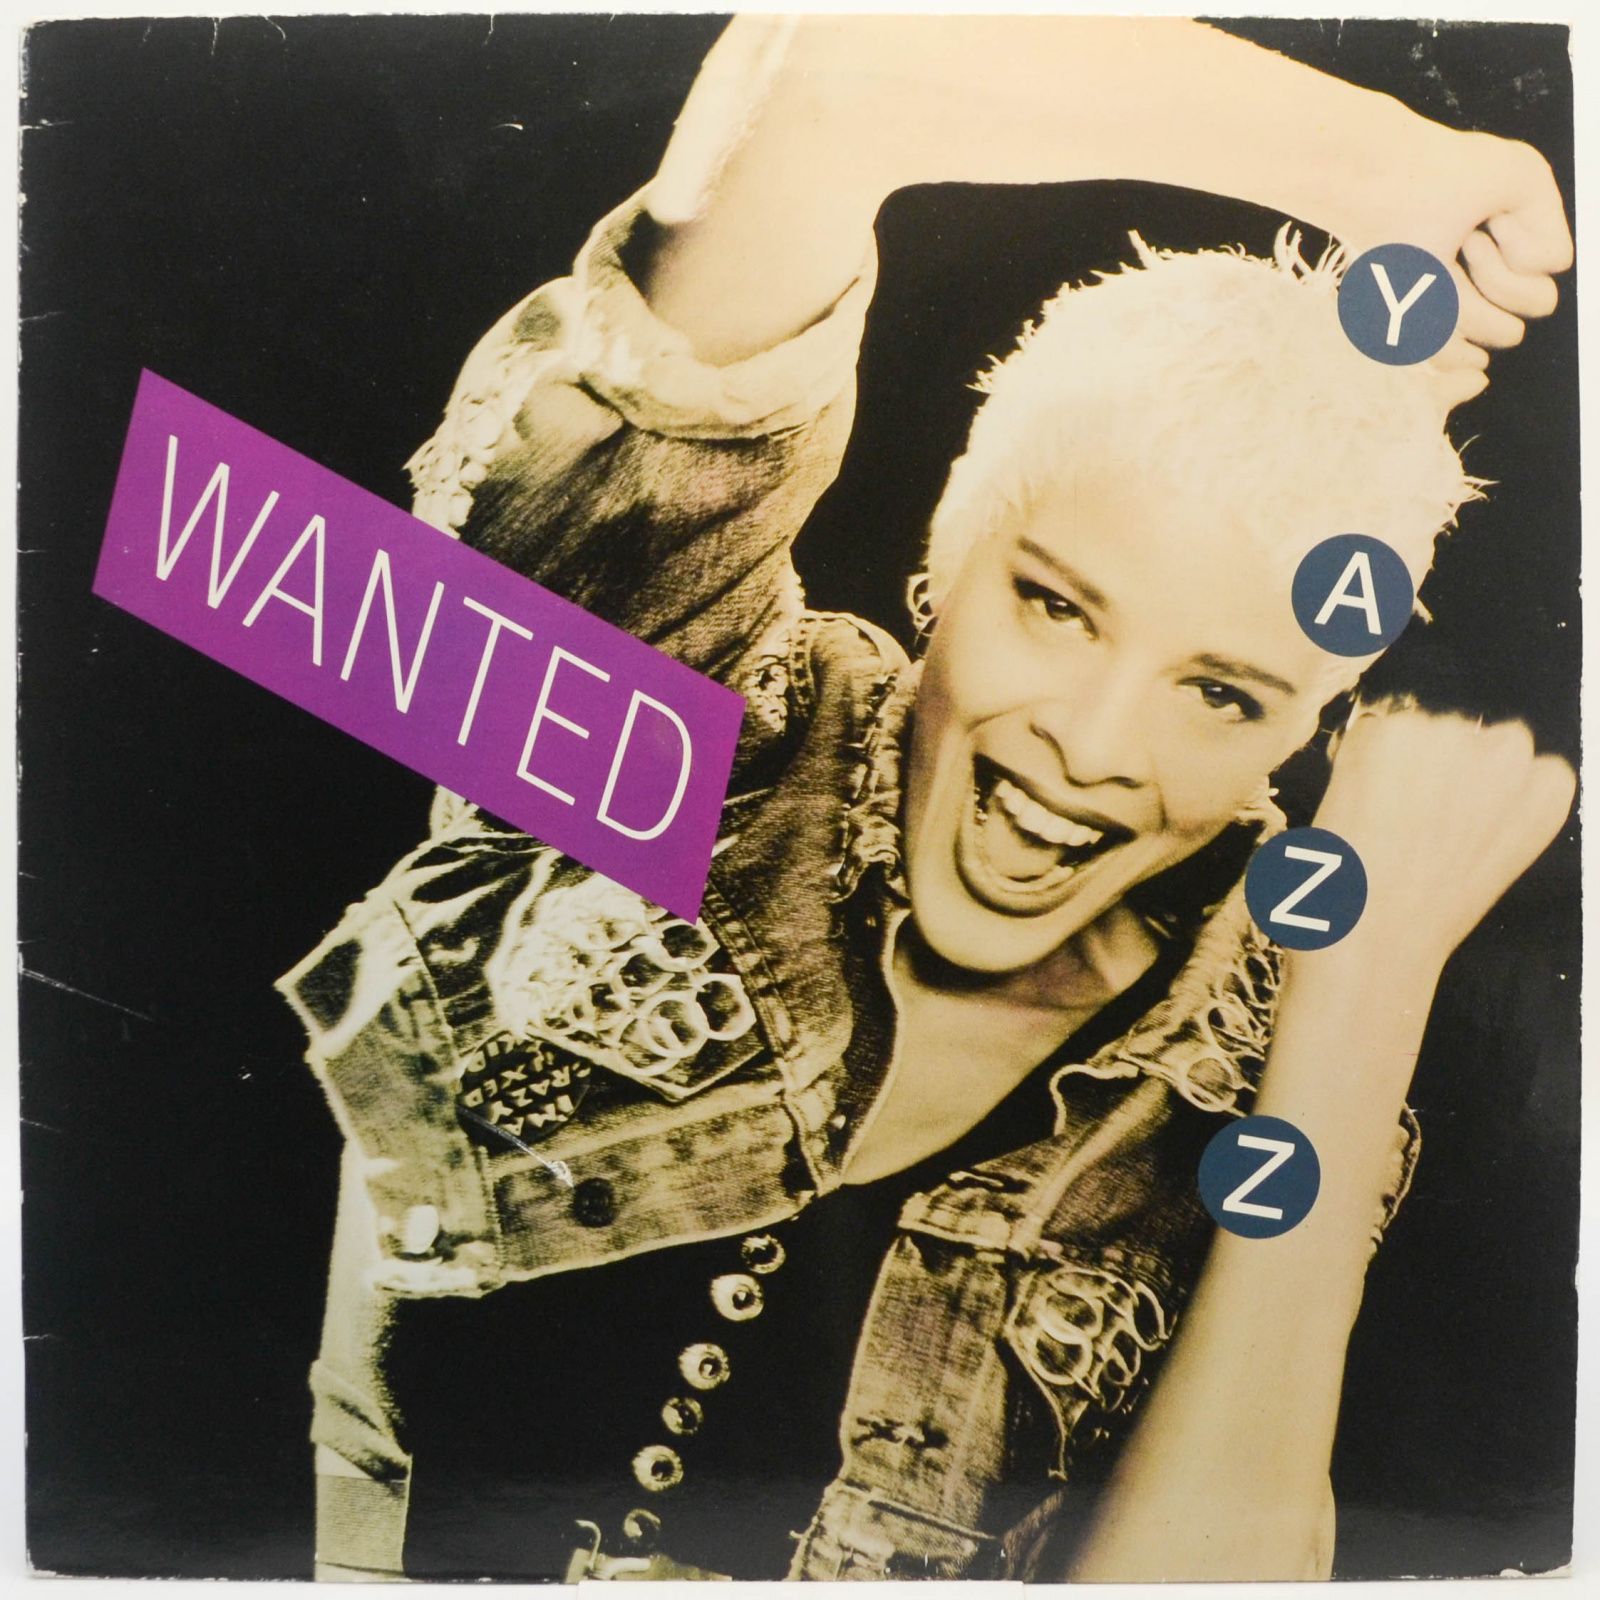 Wanted, 1988